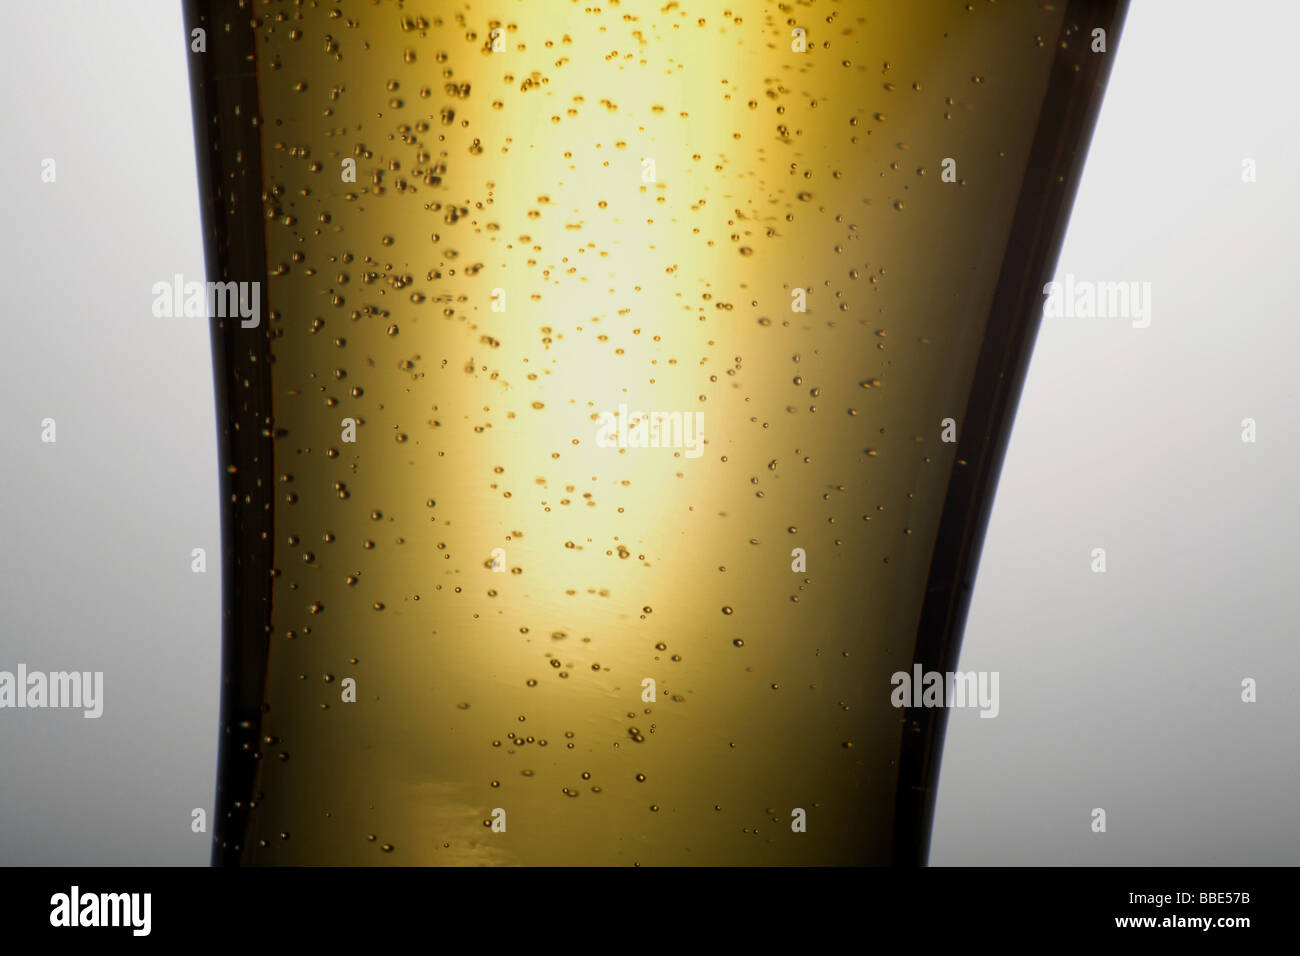 Filled beer glass, detail Stock Photo